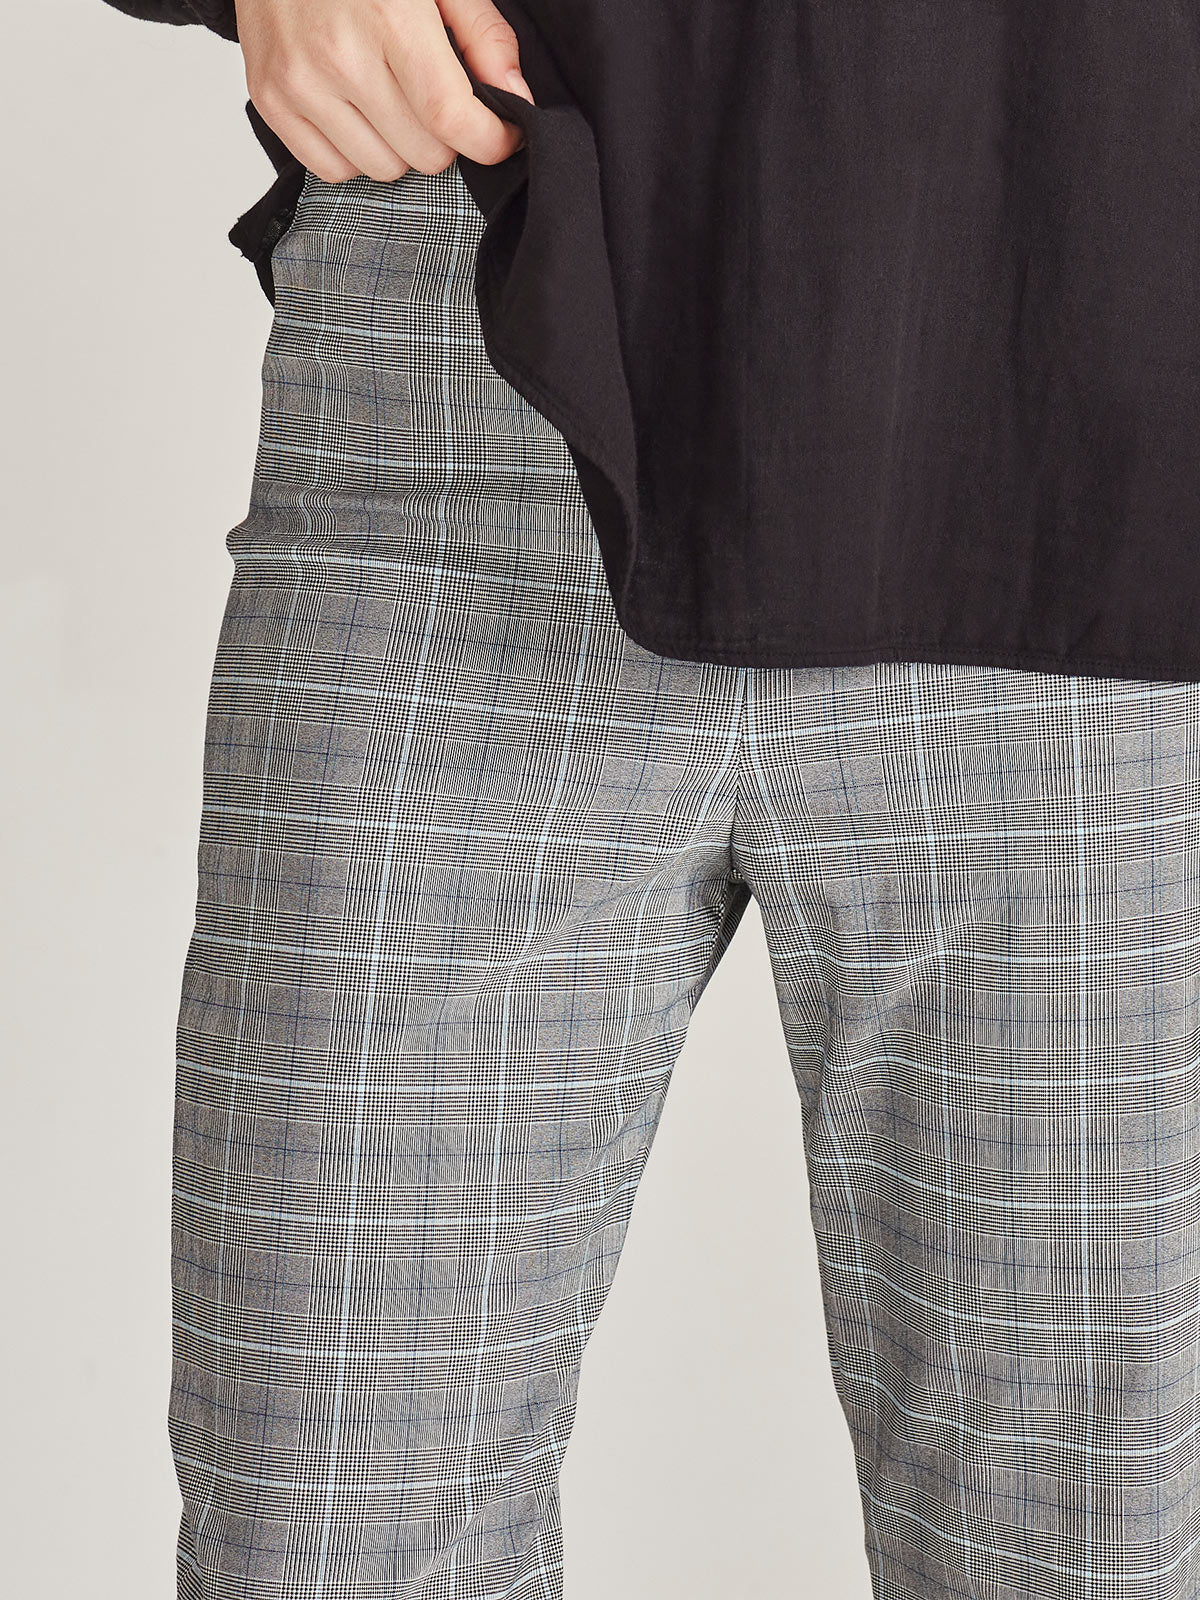 SILLS CUFFED CHECK HEPBURN - NAVY CHECK - THE VOGUE STORE